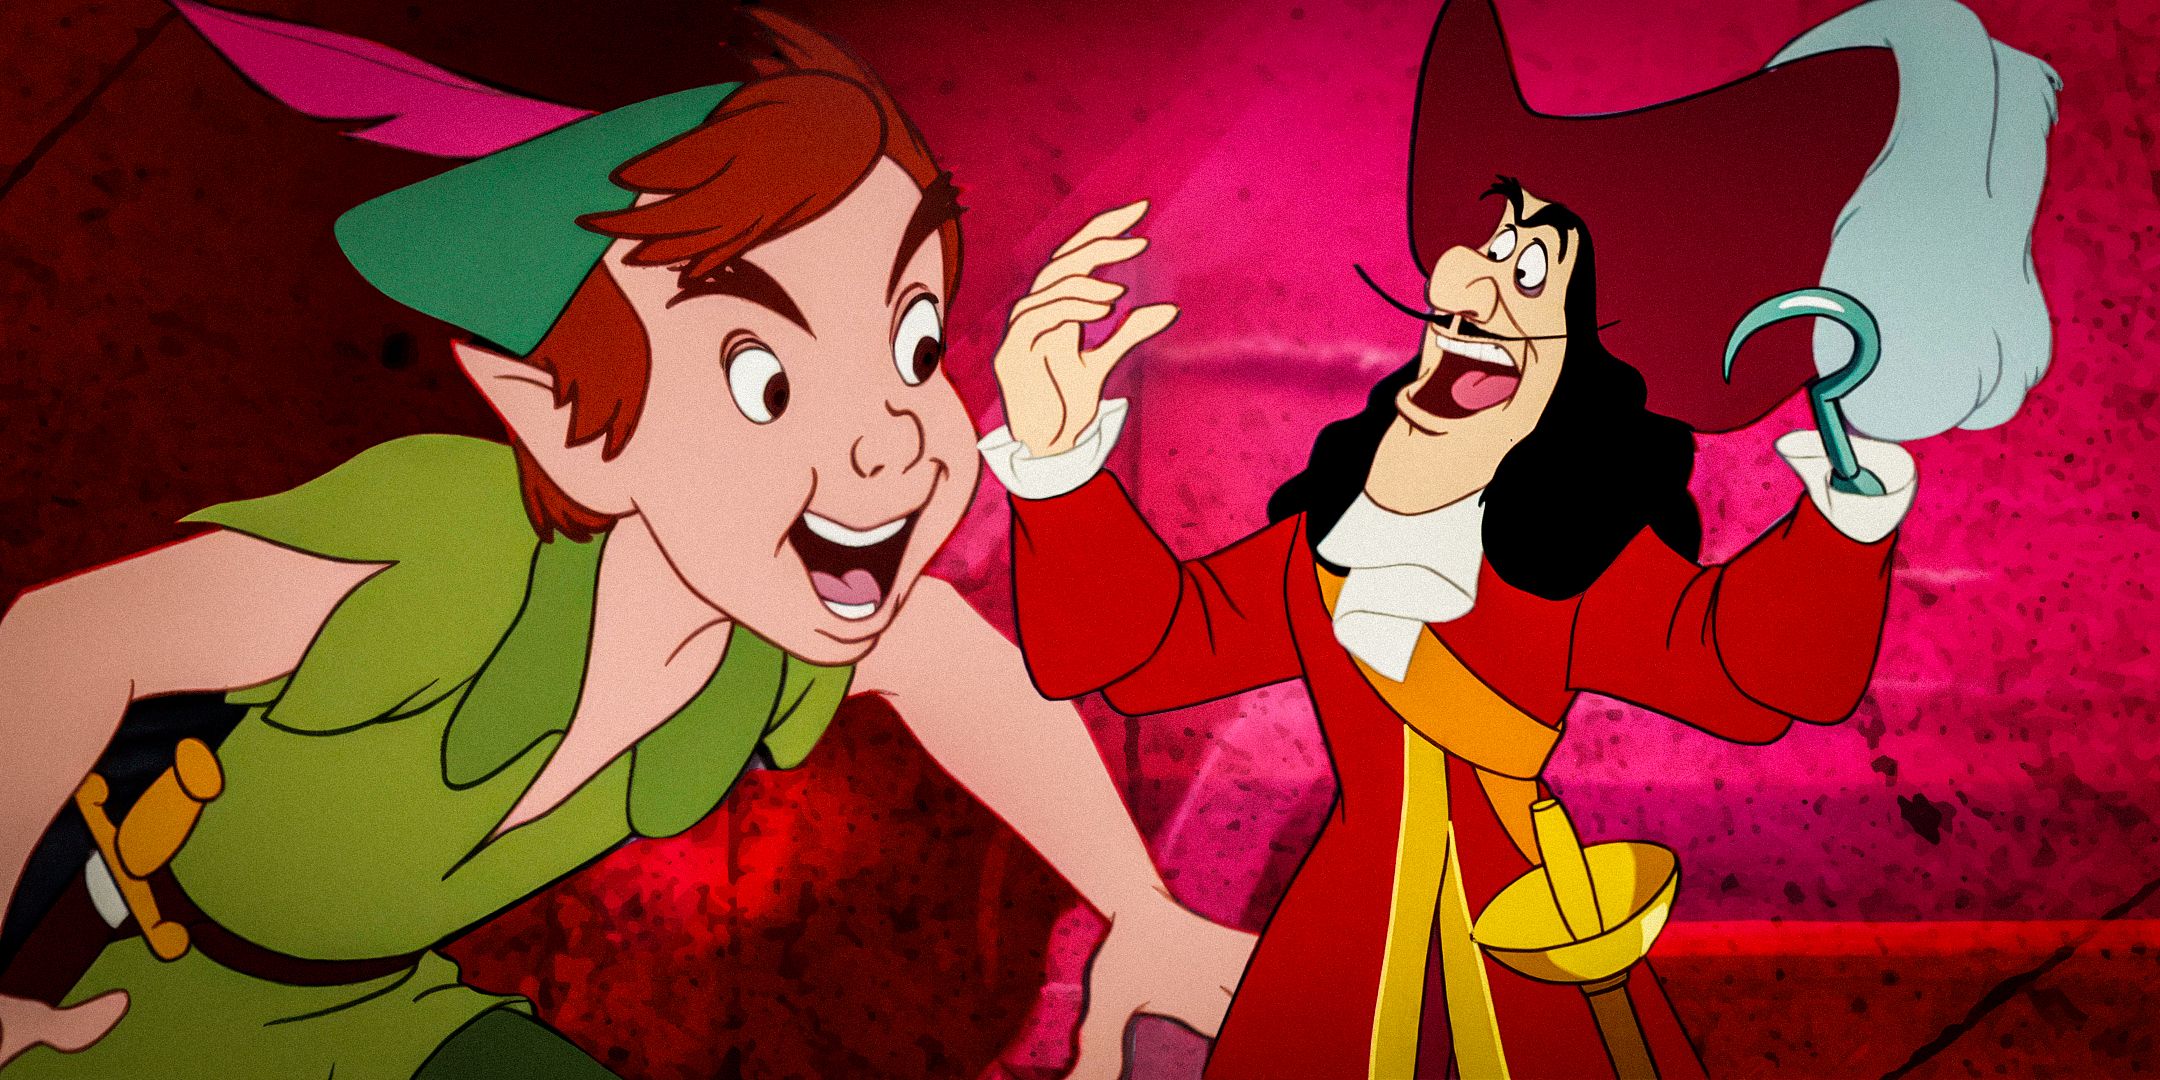 Peter Pan and Captain Hook in Disney's 1953 animated movie